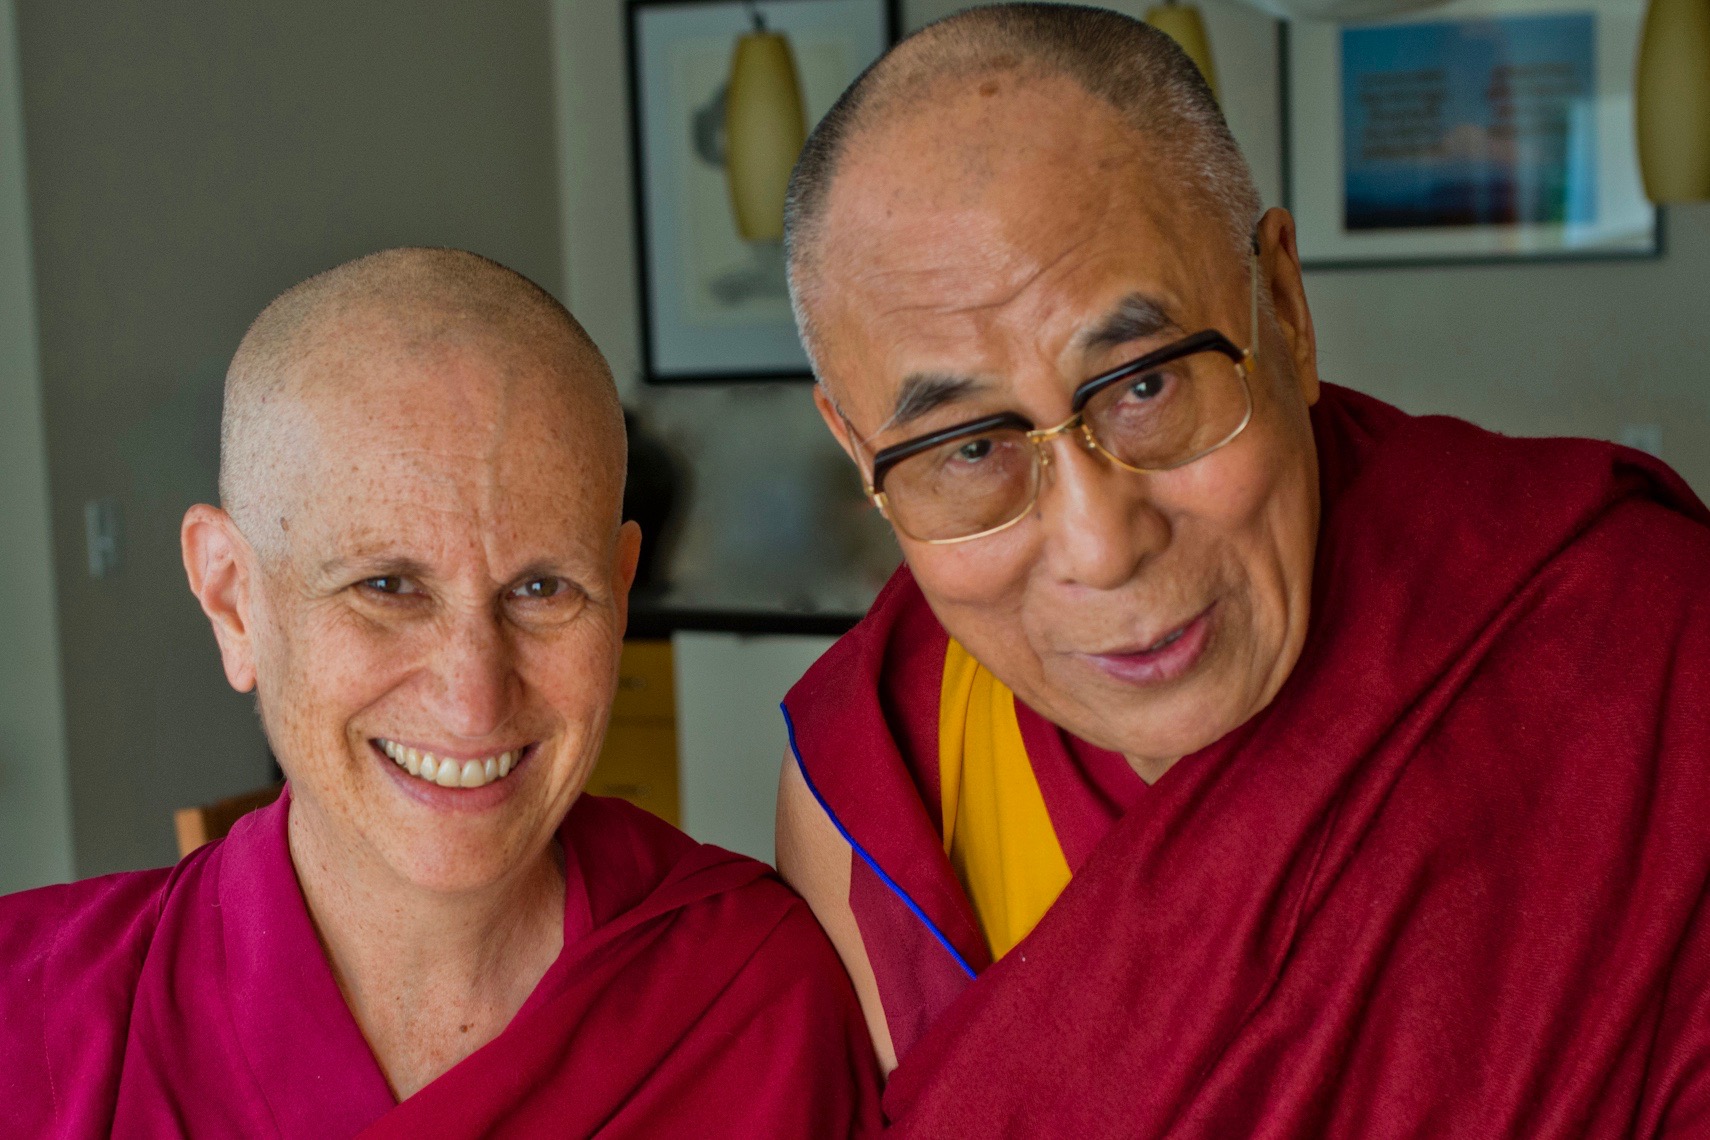 In 2013 His Holiness the Dalai Lama met in Portland with student and co-author Venerable Thubten Chodron, to discuss The Library of Wisdom and Compassion series.